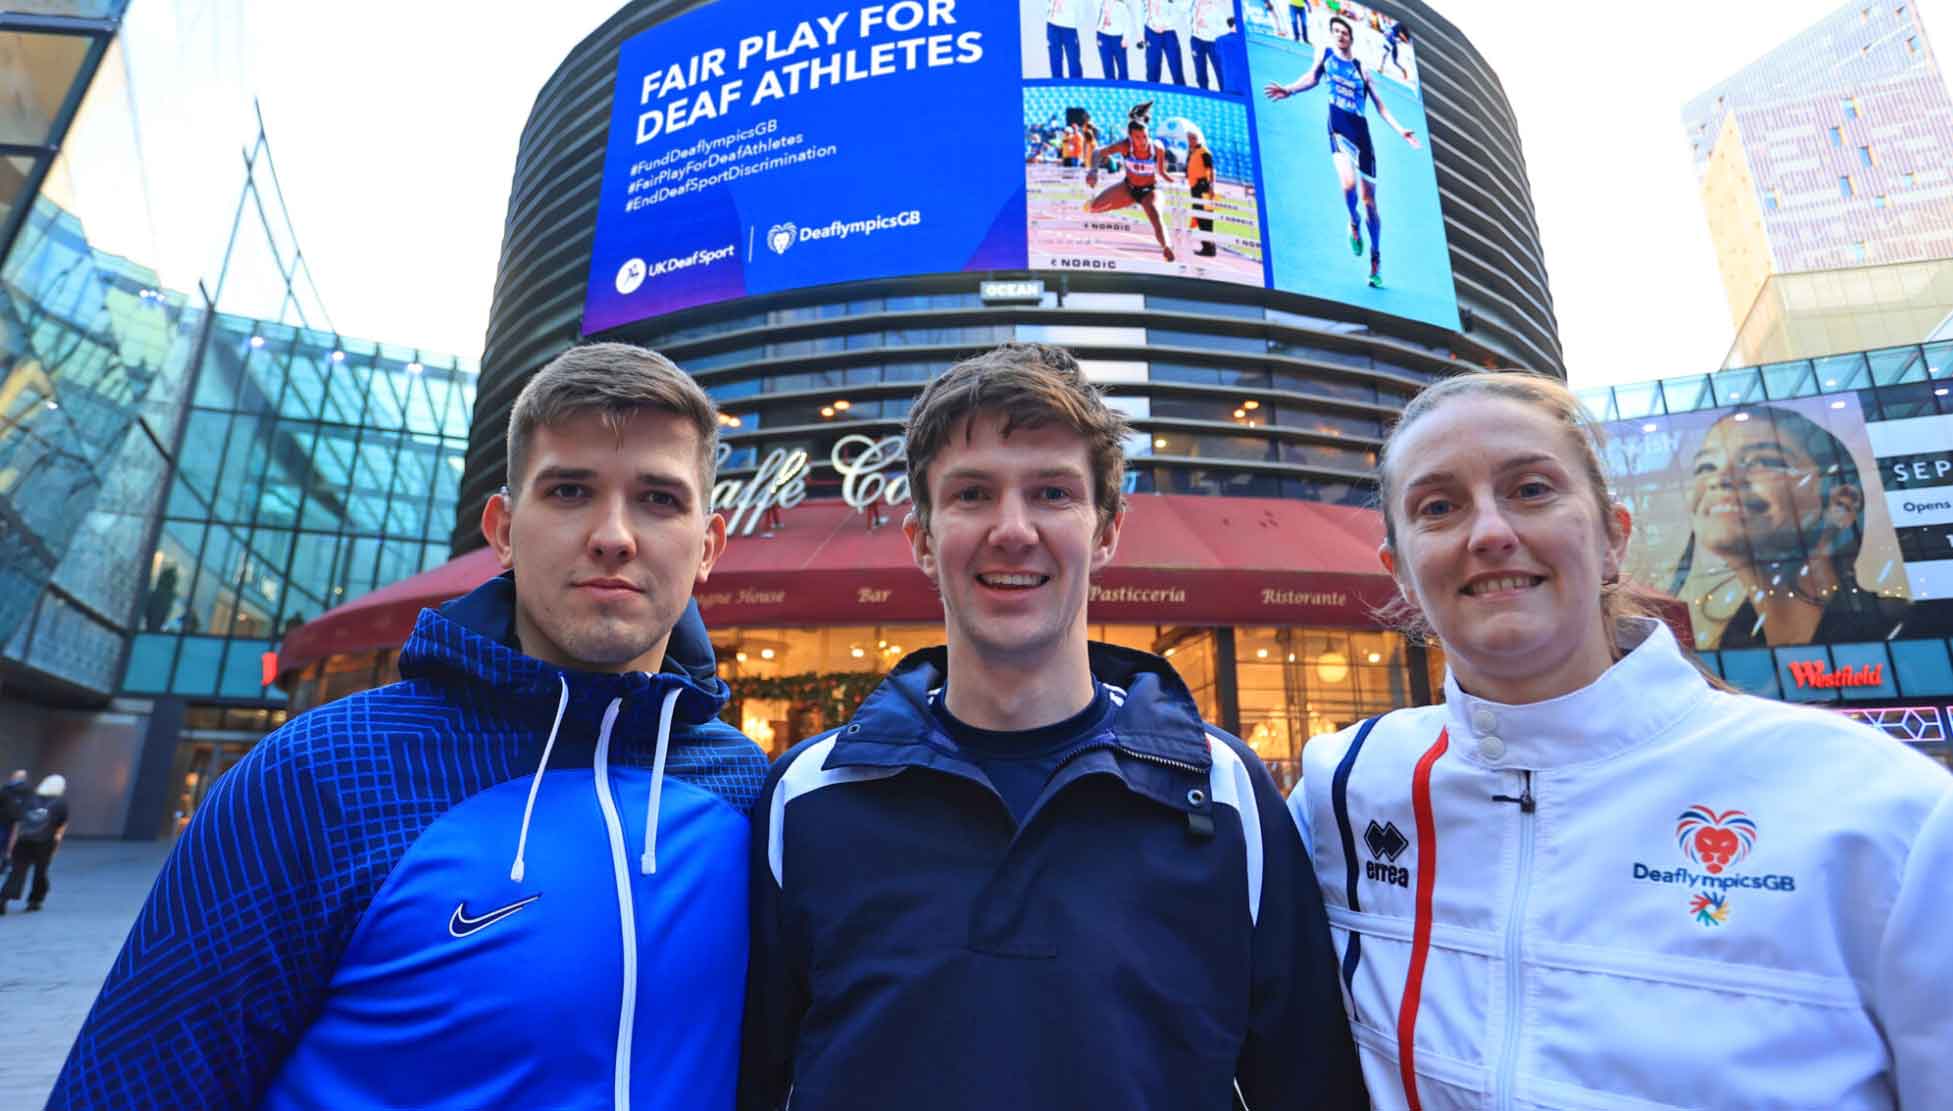 Image copyright Ocean Outdoor.  Picture shows athletes (left to right) Nathan Young, Oliver Pritchard and Claire Stancliffe at the launch of their first OOH campaign which calls for Fair Play for Deaf Athletes. UK Deaf Sport is lobbying the Government to end discrimination against elite deaf athletes. 